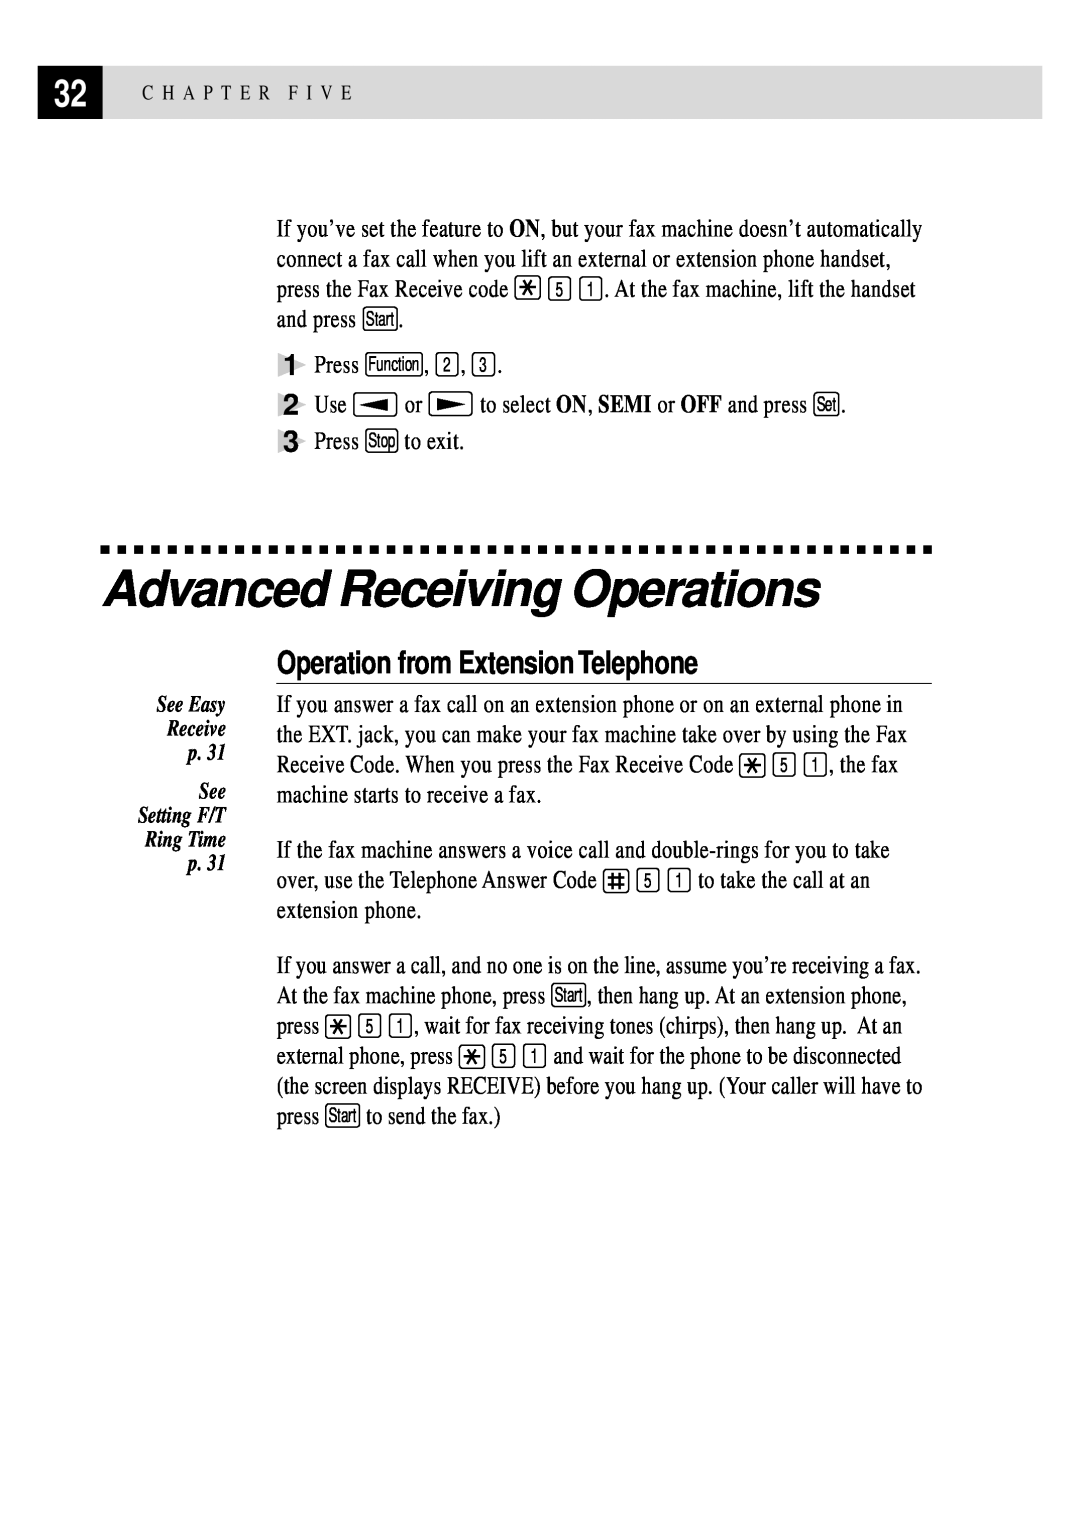 Brother FAX 255 owner manual Advanced Receiving Operations, Operation from Extension Telephone 